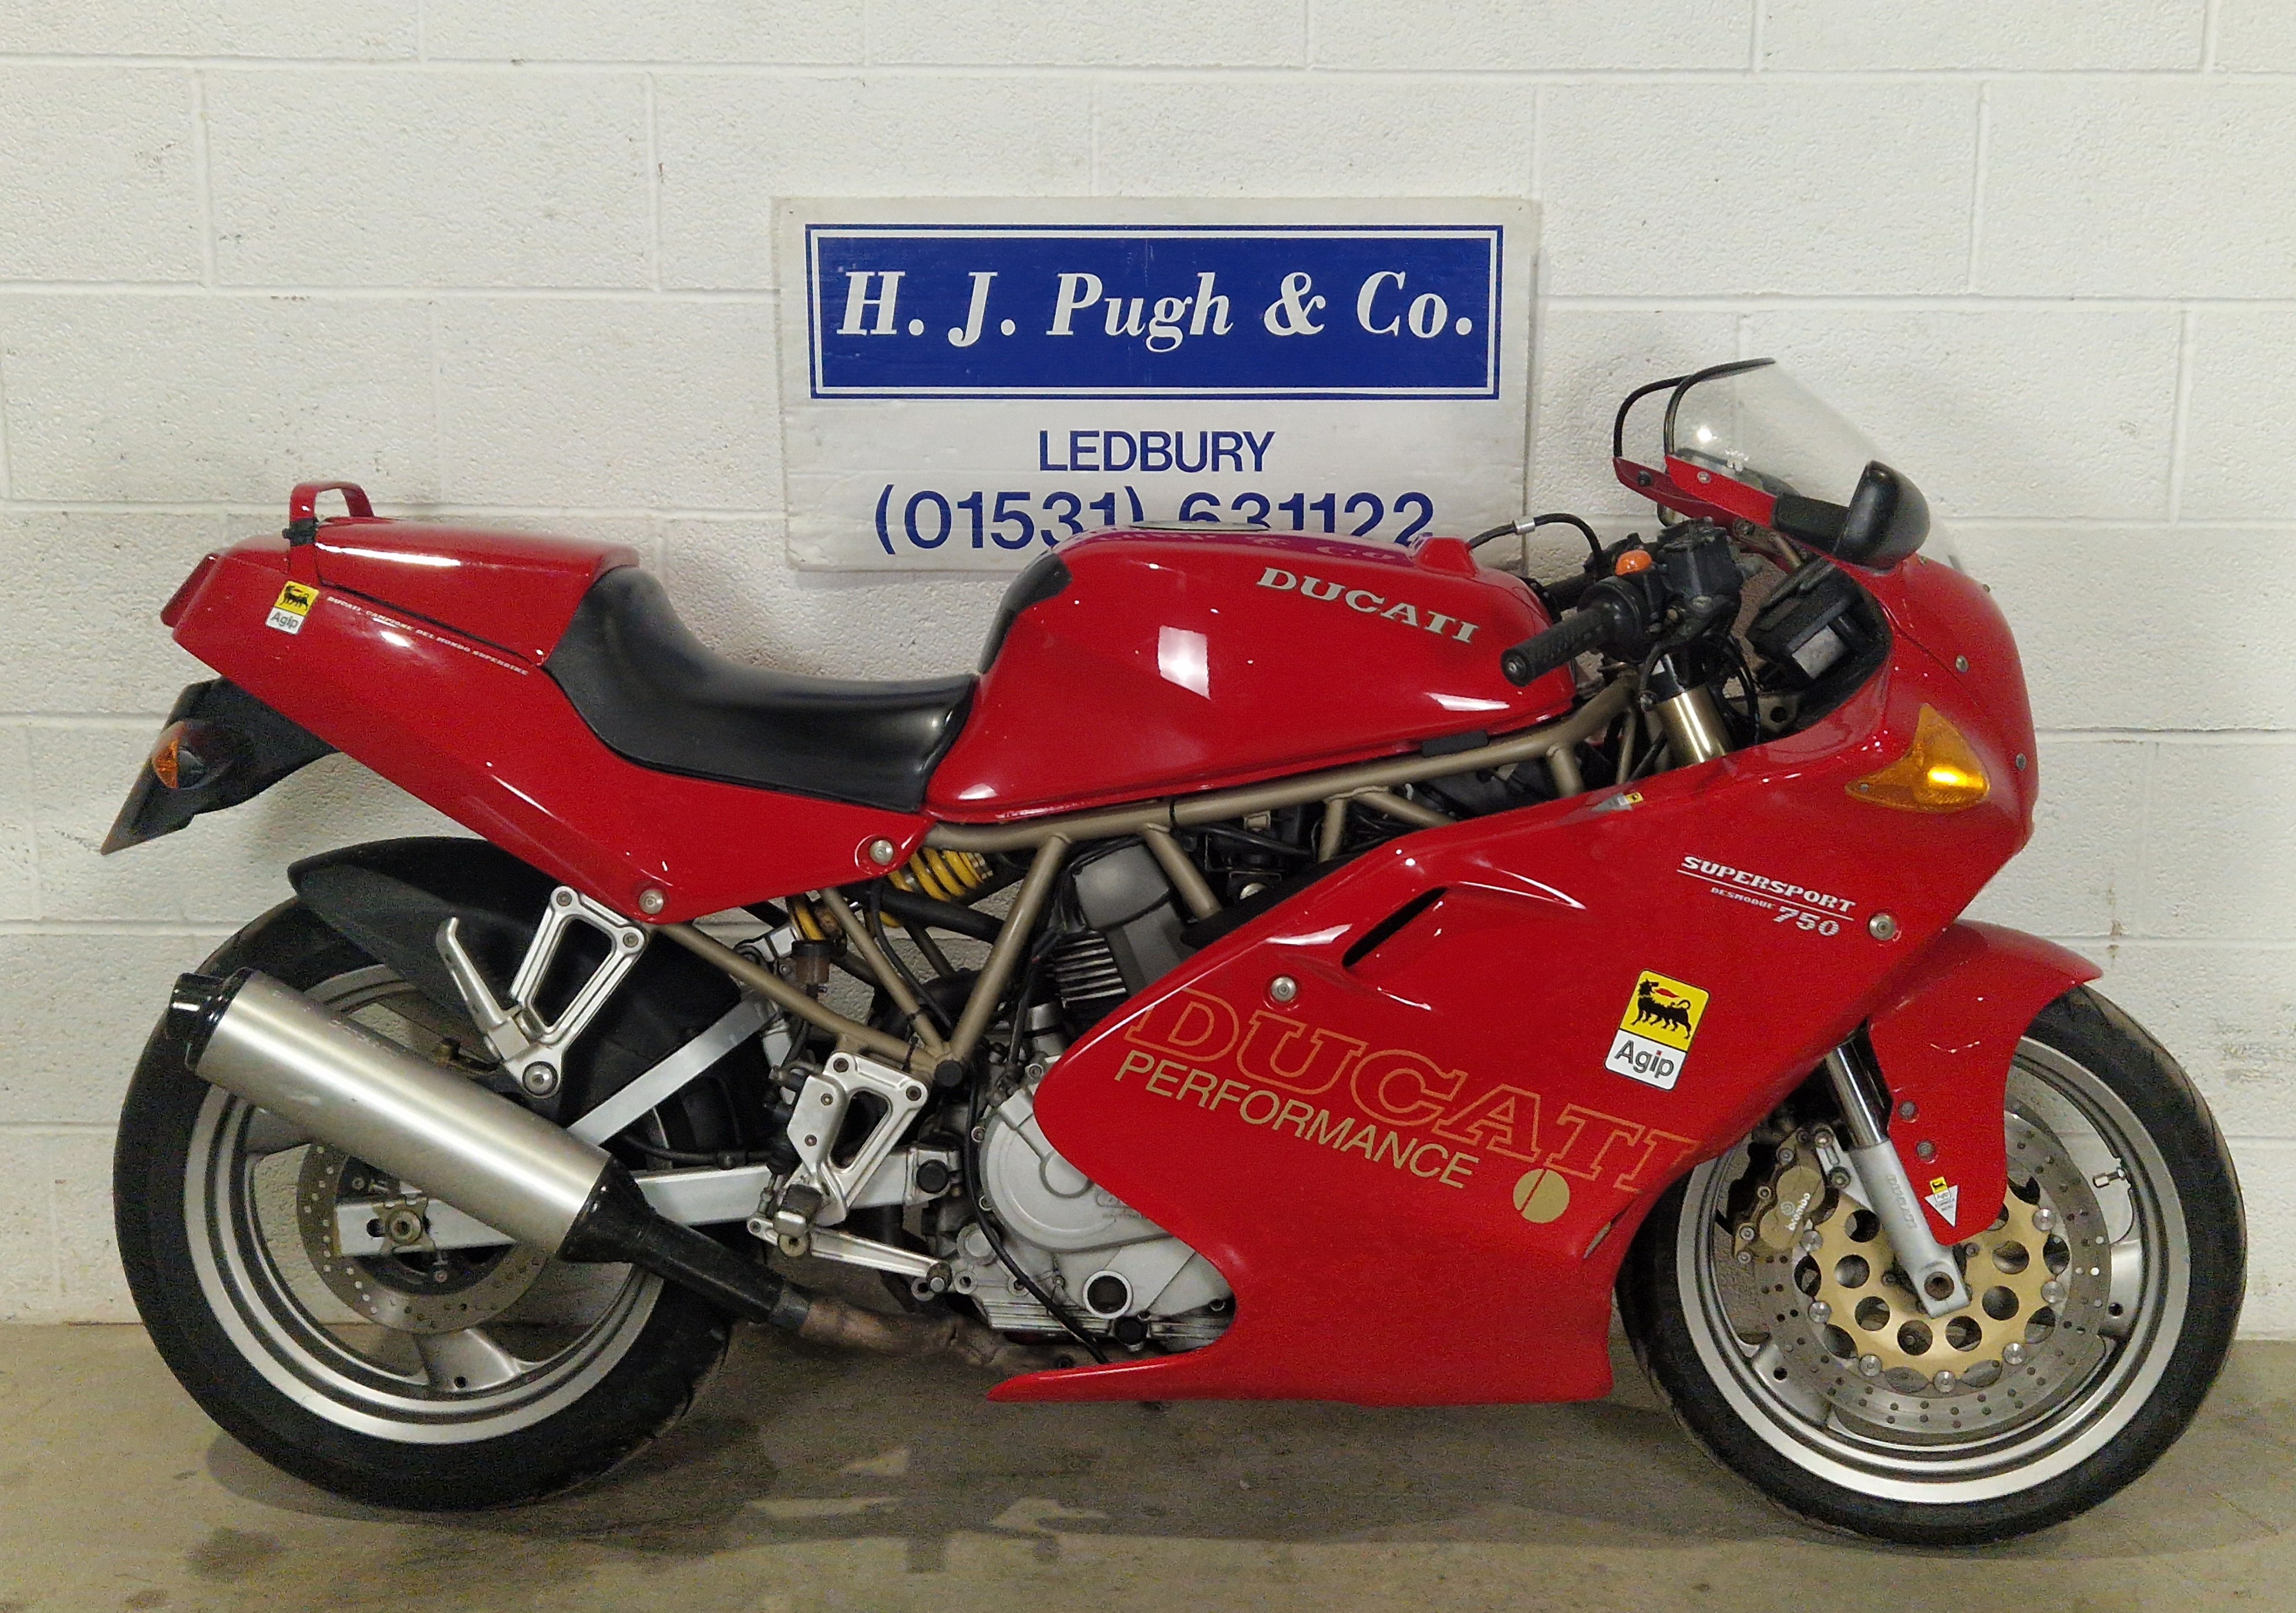 Ducatti 750 SuperSport motorcycle. 1998. 750cc. Runs and rides. Comes with the original owners